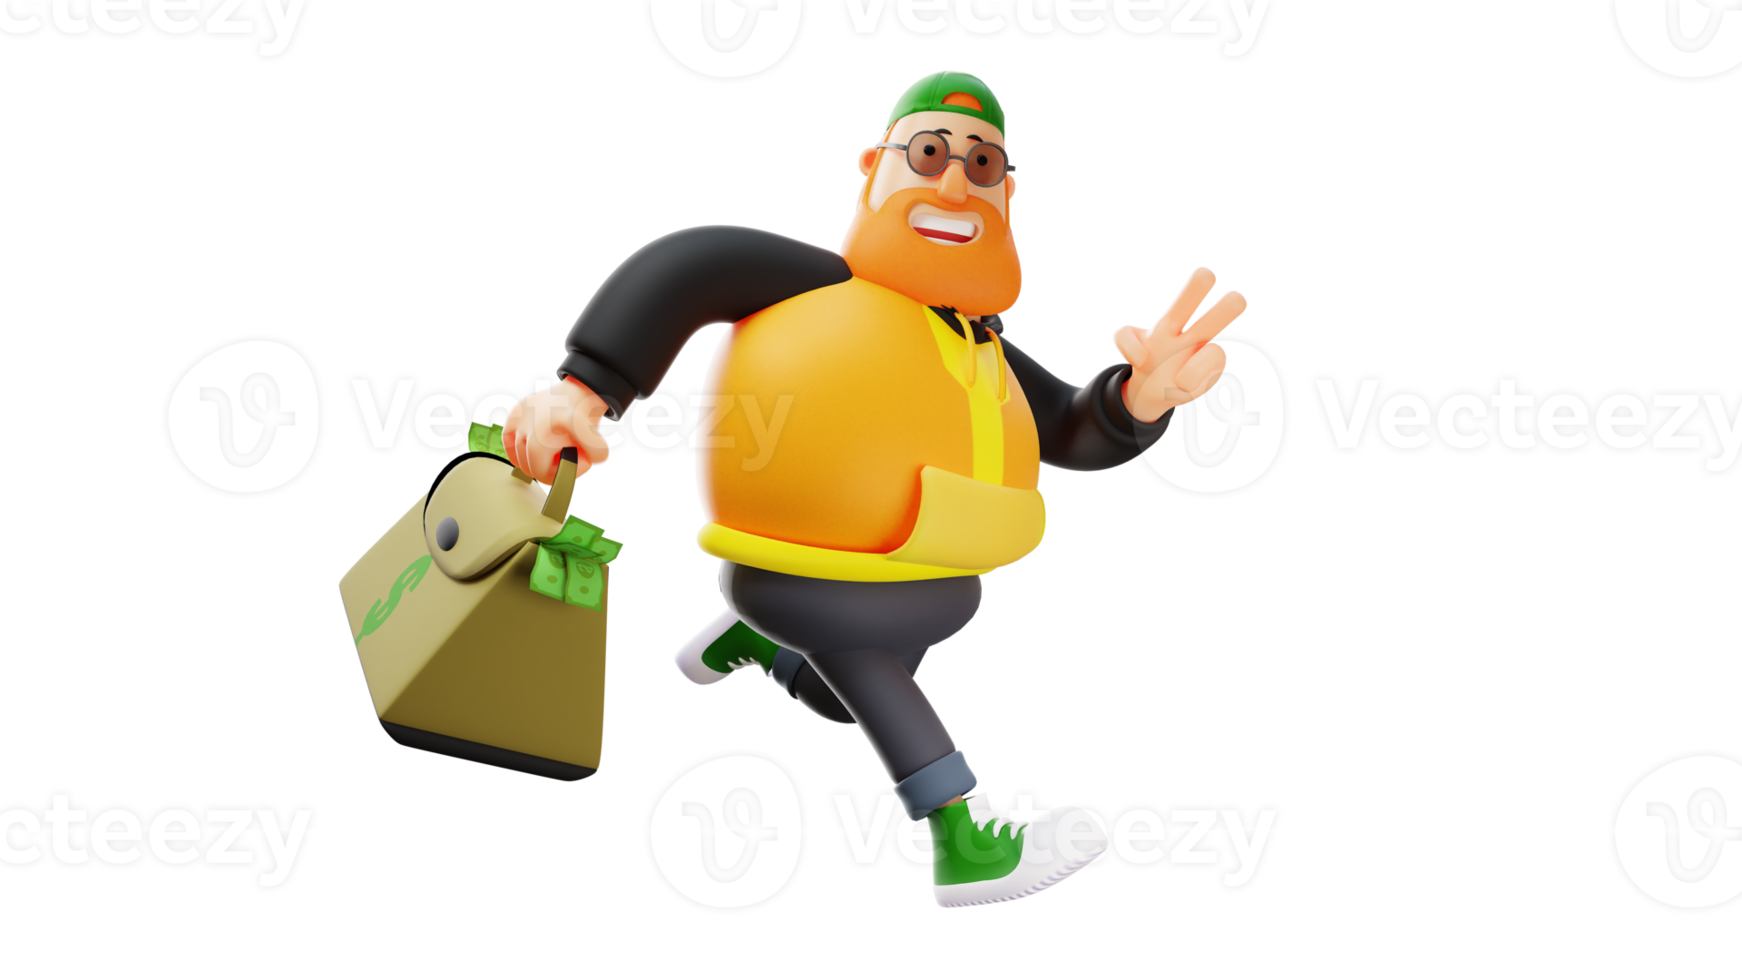 3D Illustration. Stylish Fat Man 3D Cartoon Character. The fat man who ran while carrying a bag full of money. A rich man smiled and showed a sign of peace. 3D Cartoon Character png